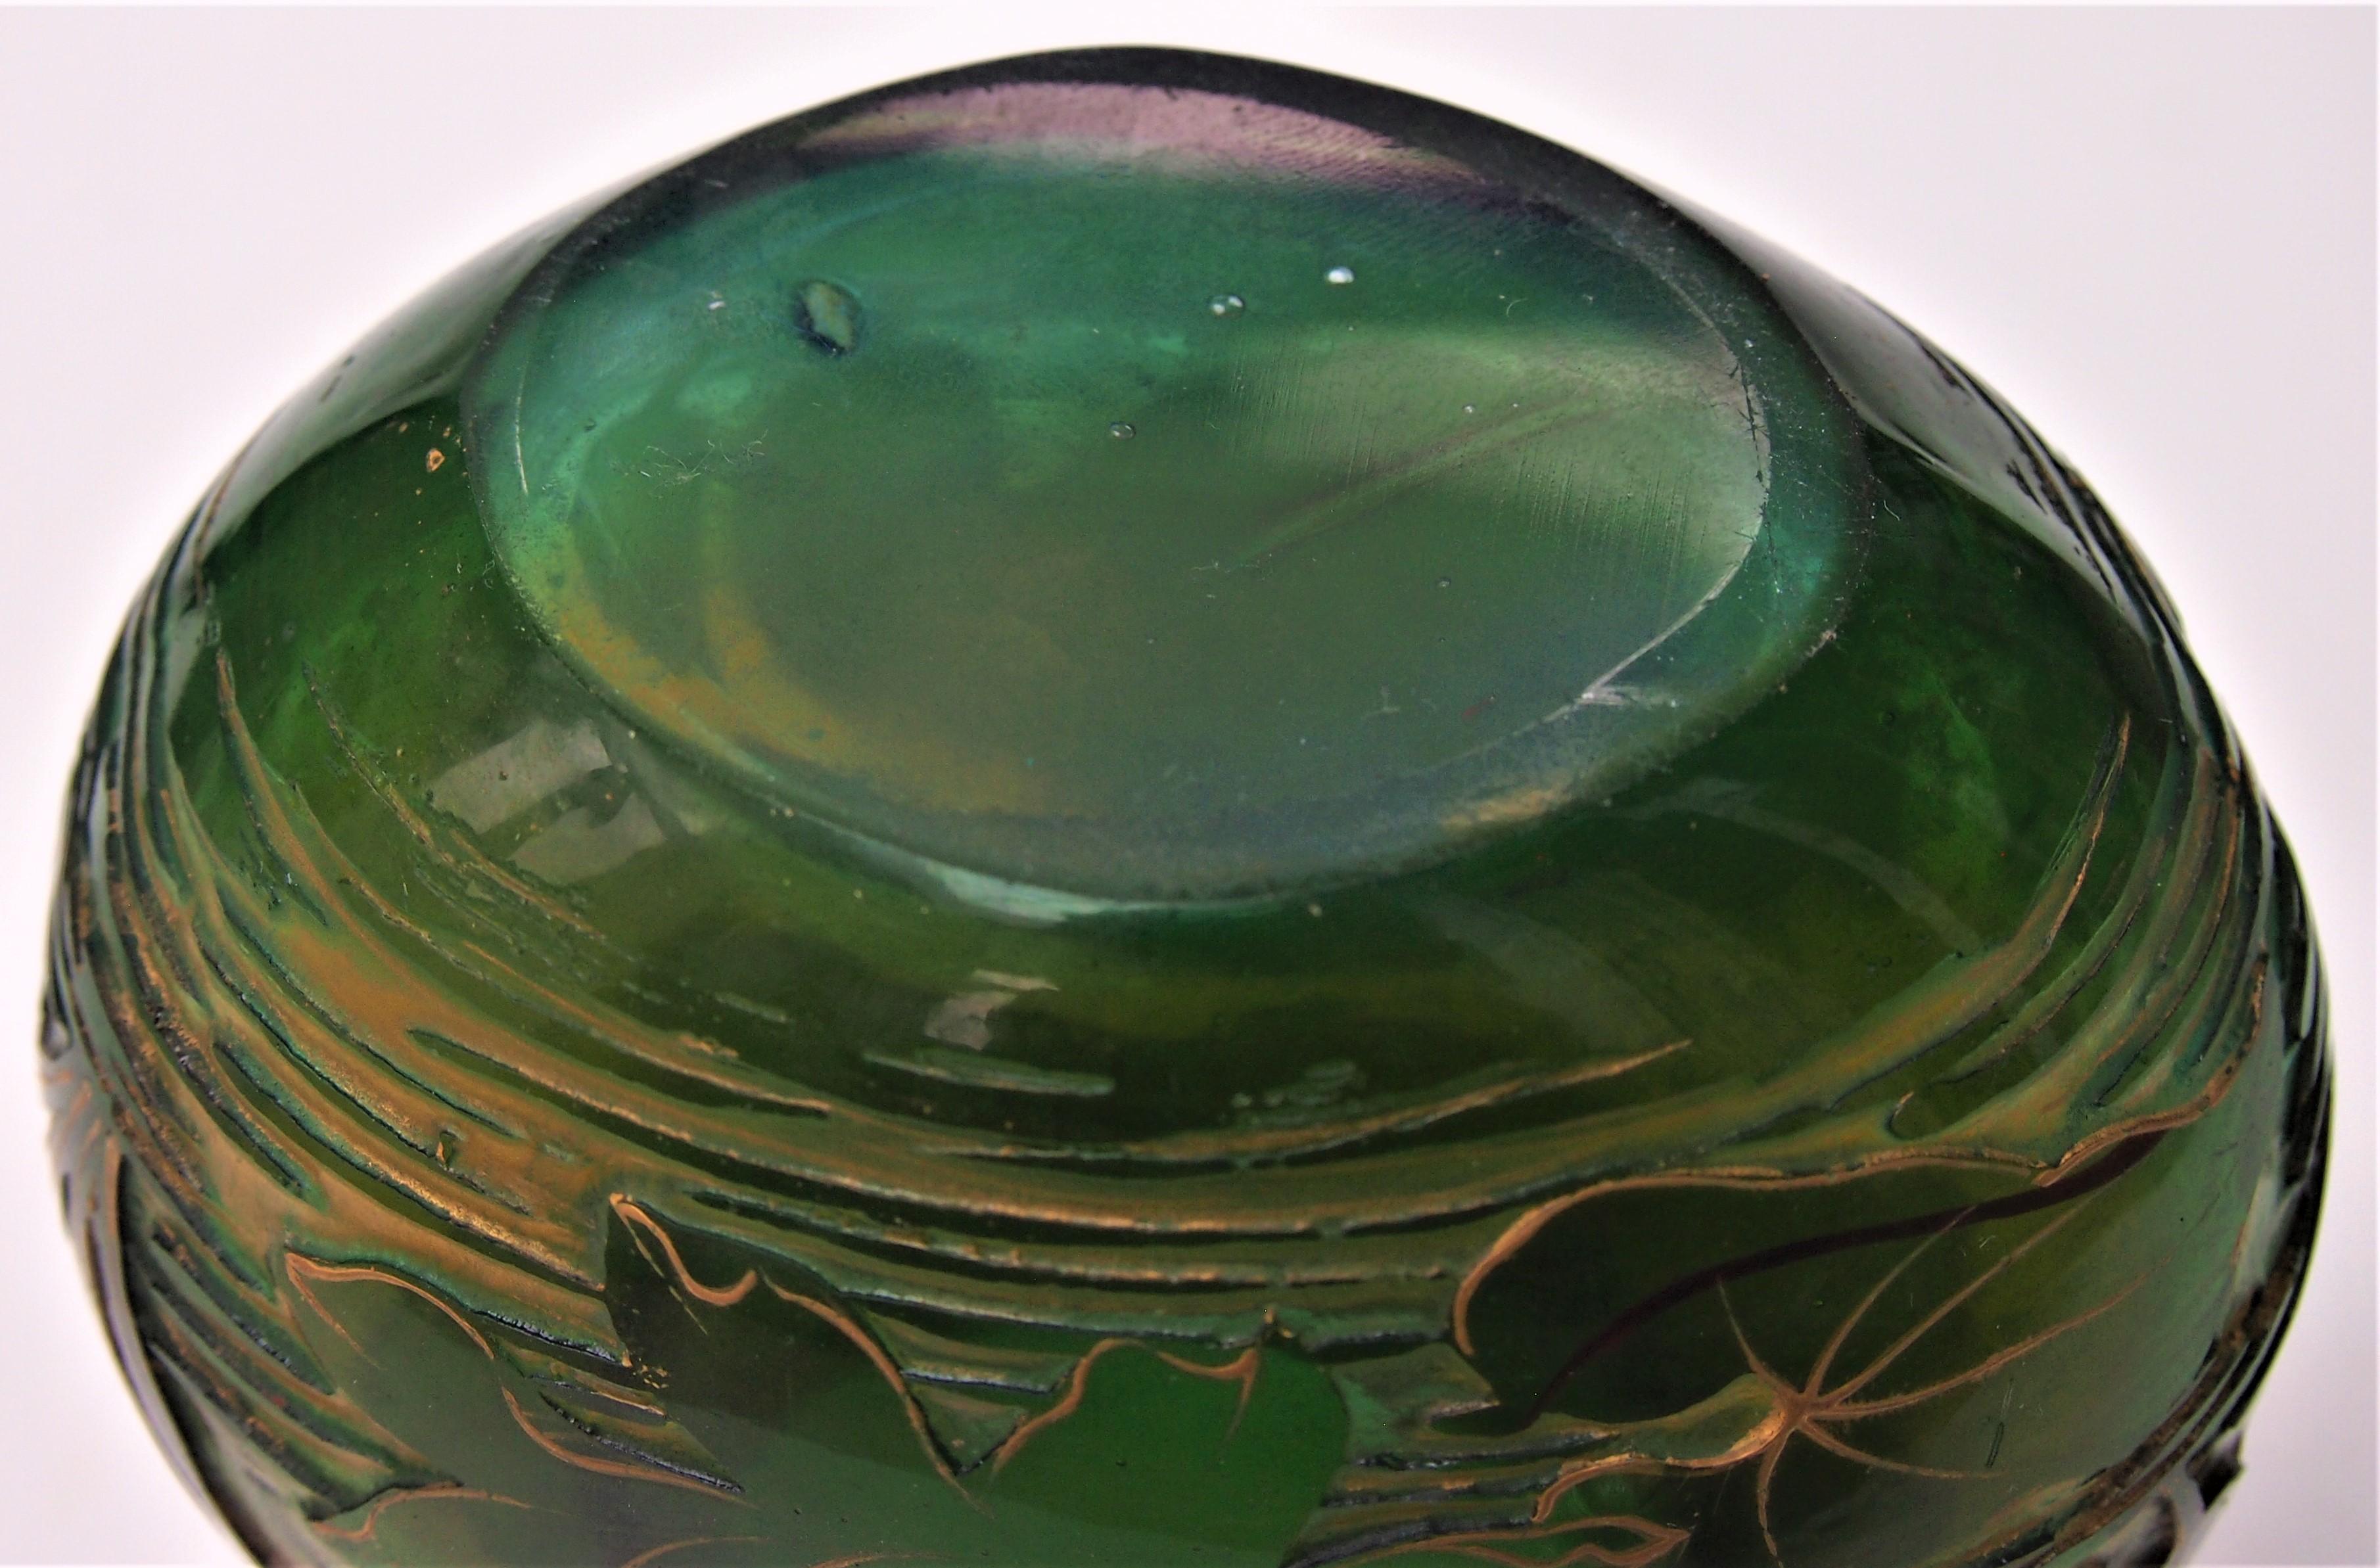 Harrach Waterlily Cameo Vase green over opal orange glass gilded c1900 1